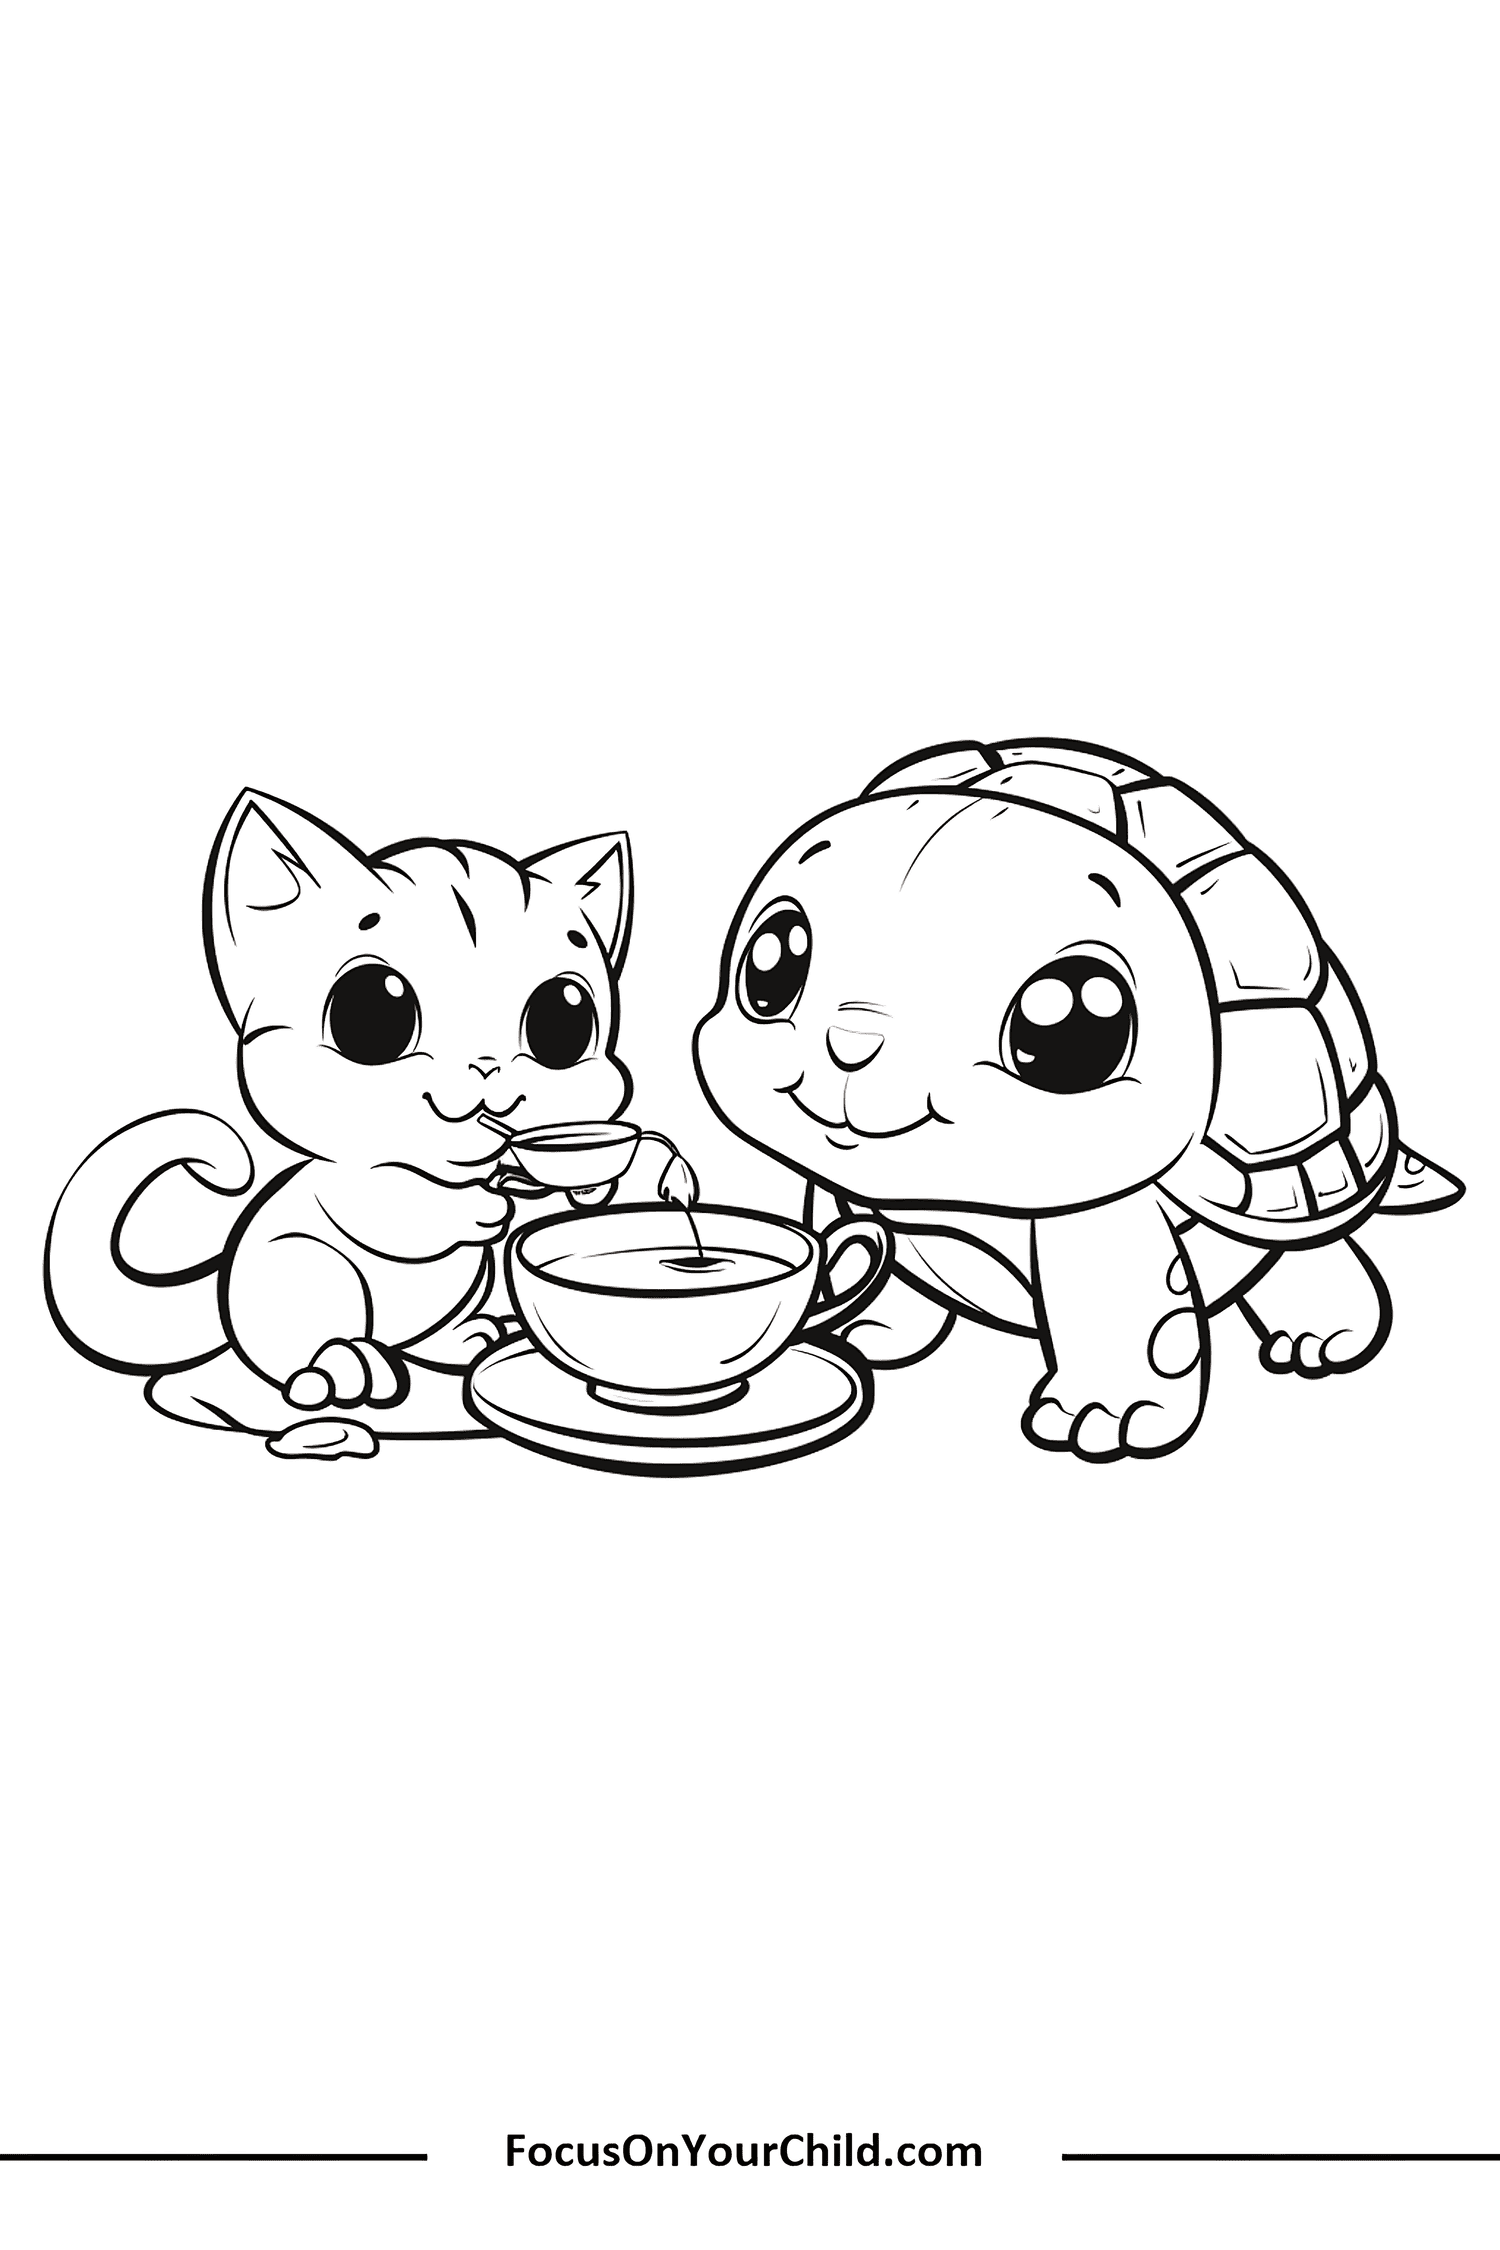 Adorable kitten and turtle enjoying a tea party together in a heartwarming illustration.